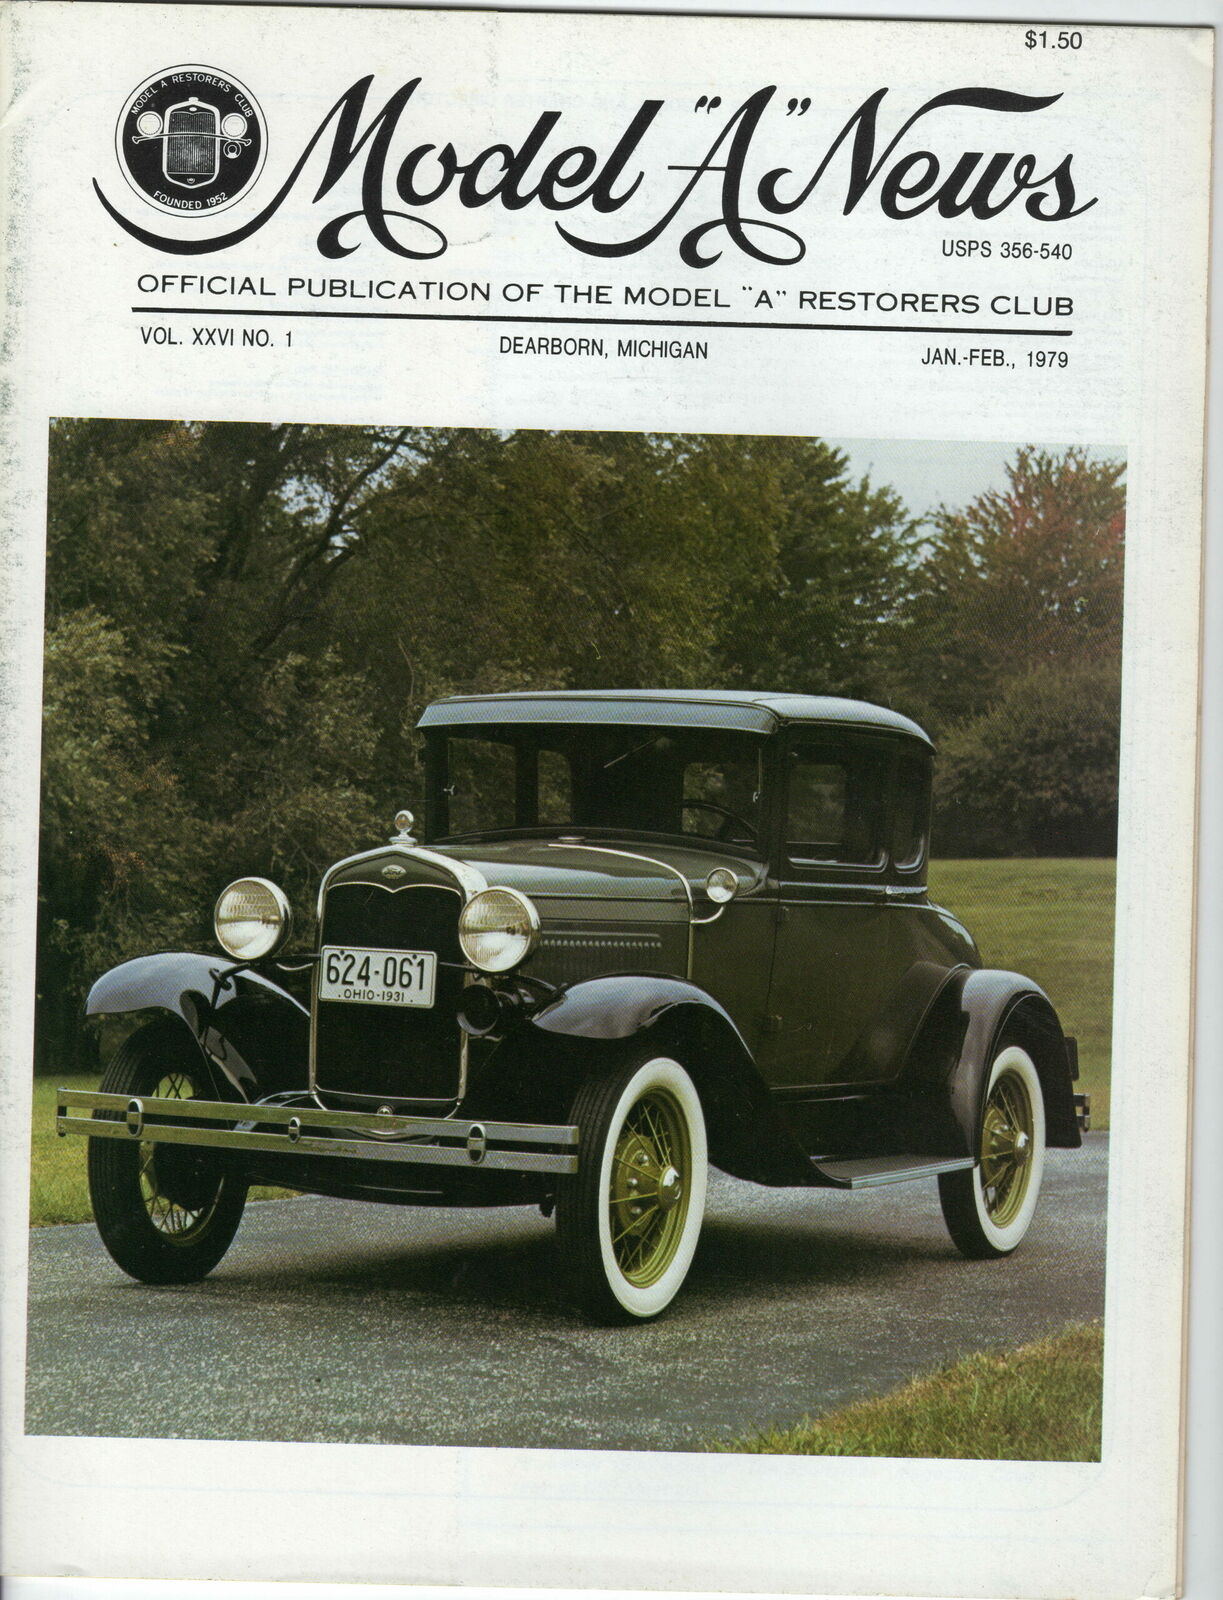 1931 DELUXE COUPE - MODEL “A” NEWS OFFICIAL PUBLICATION VOL.26 1979 MAGAZINE